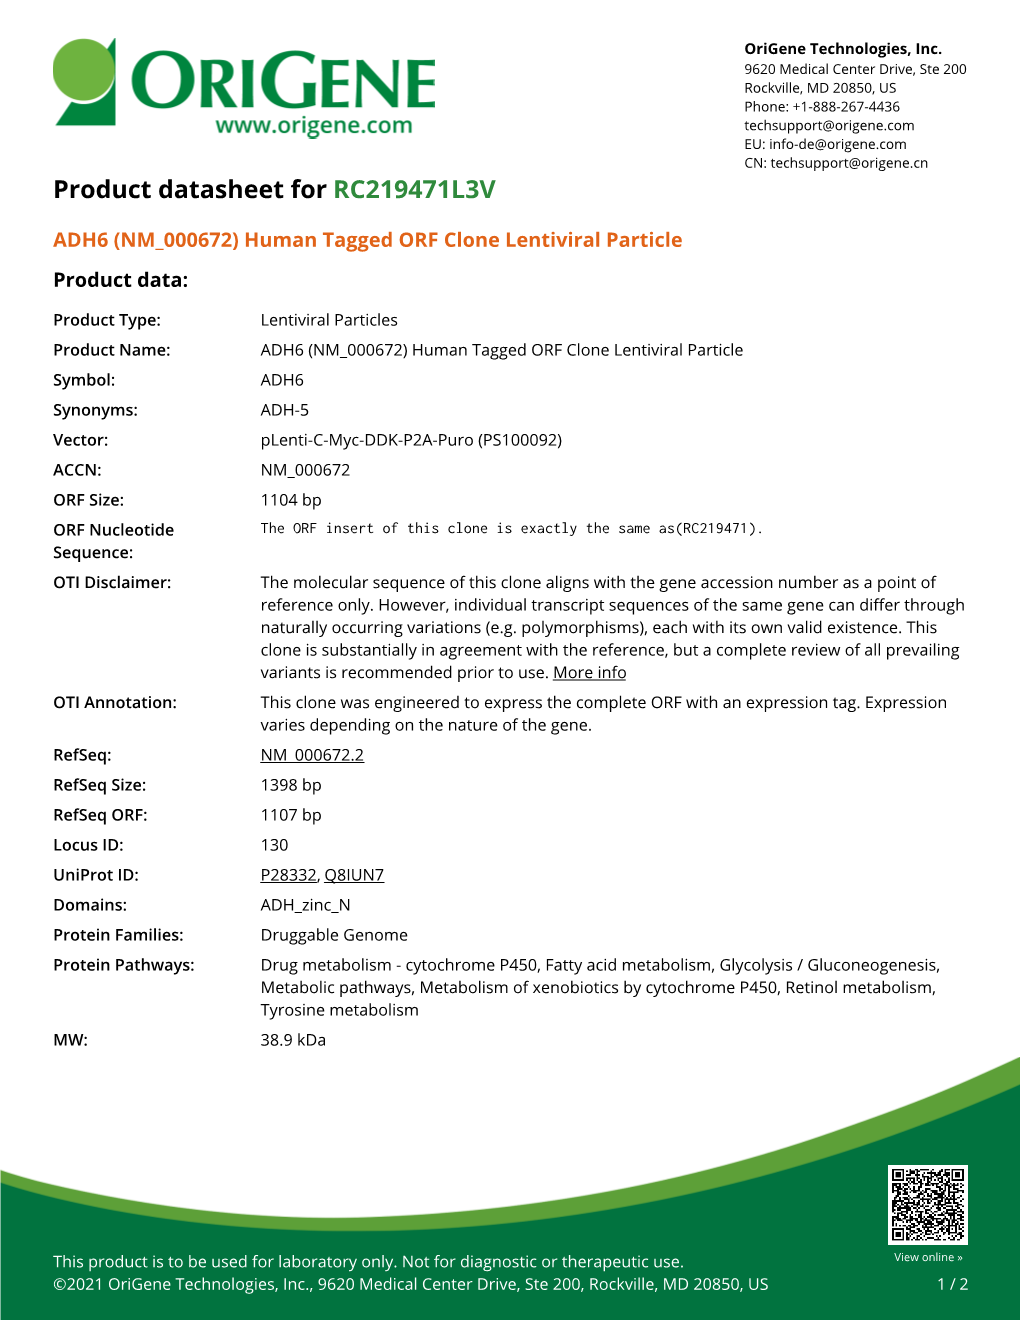 ADH6 (NM 000672) Human Tagged ORF Clone Lentiviral Particle Product Data